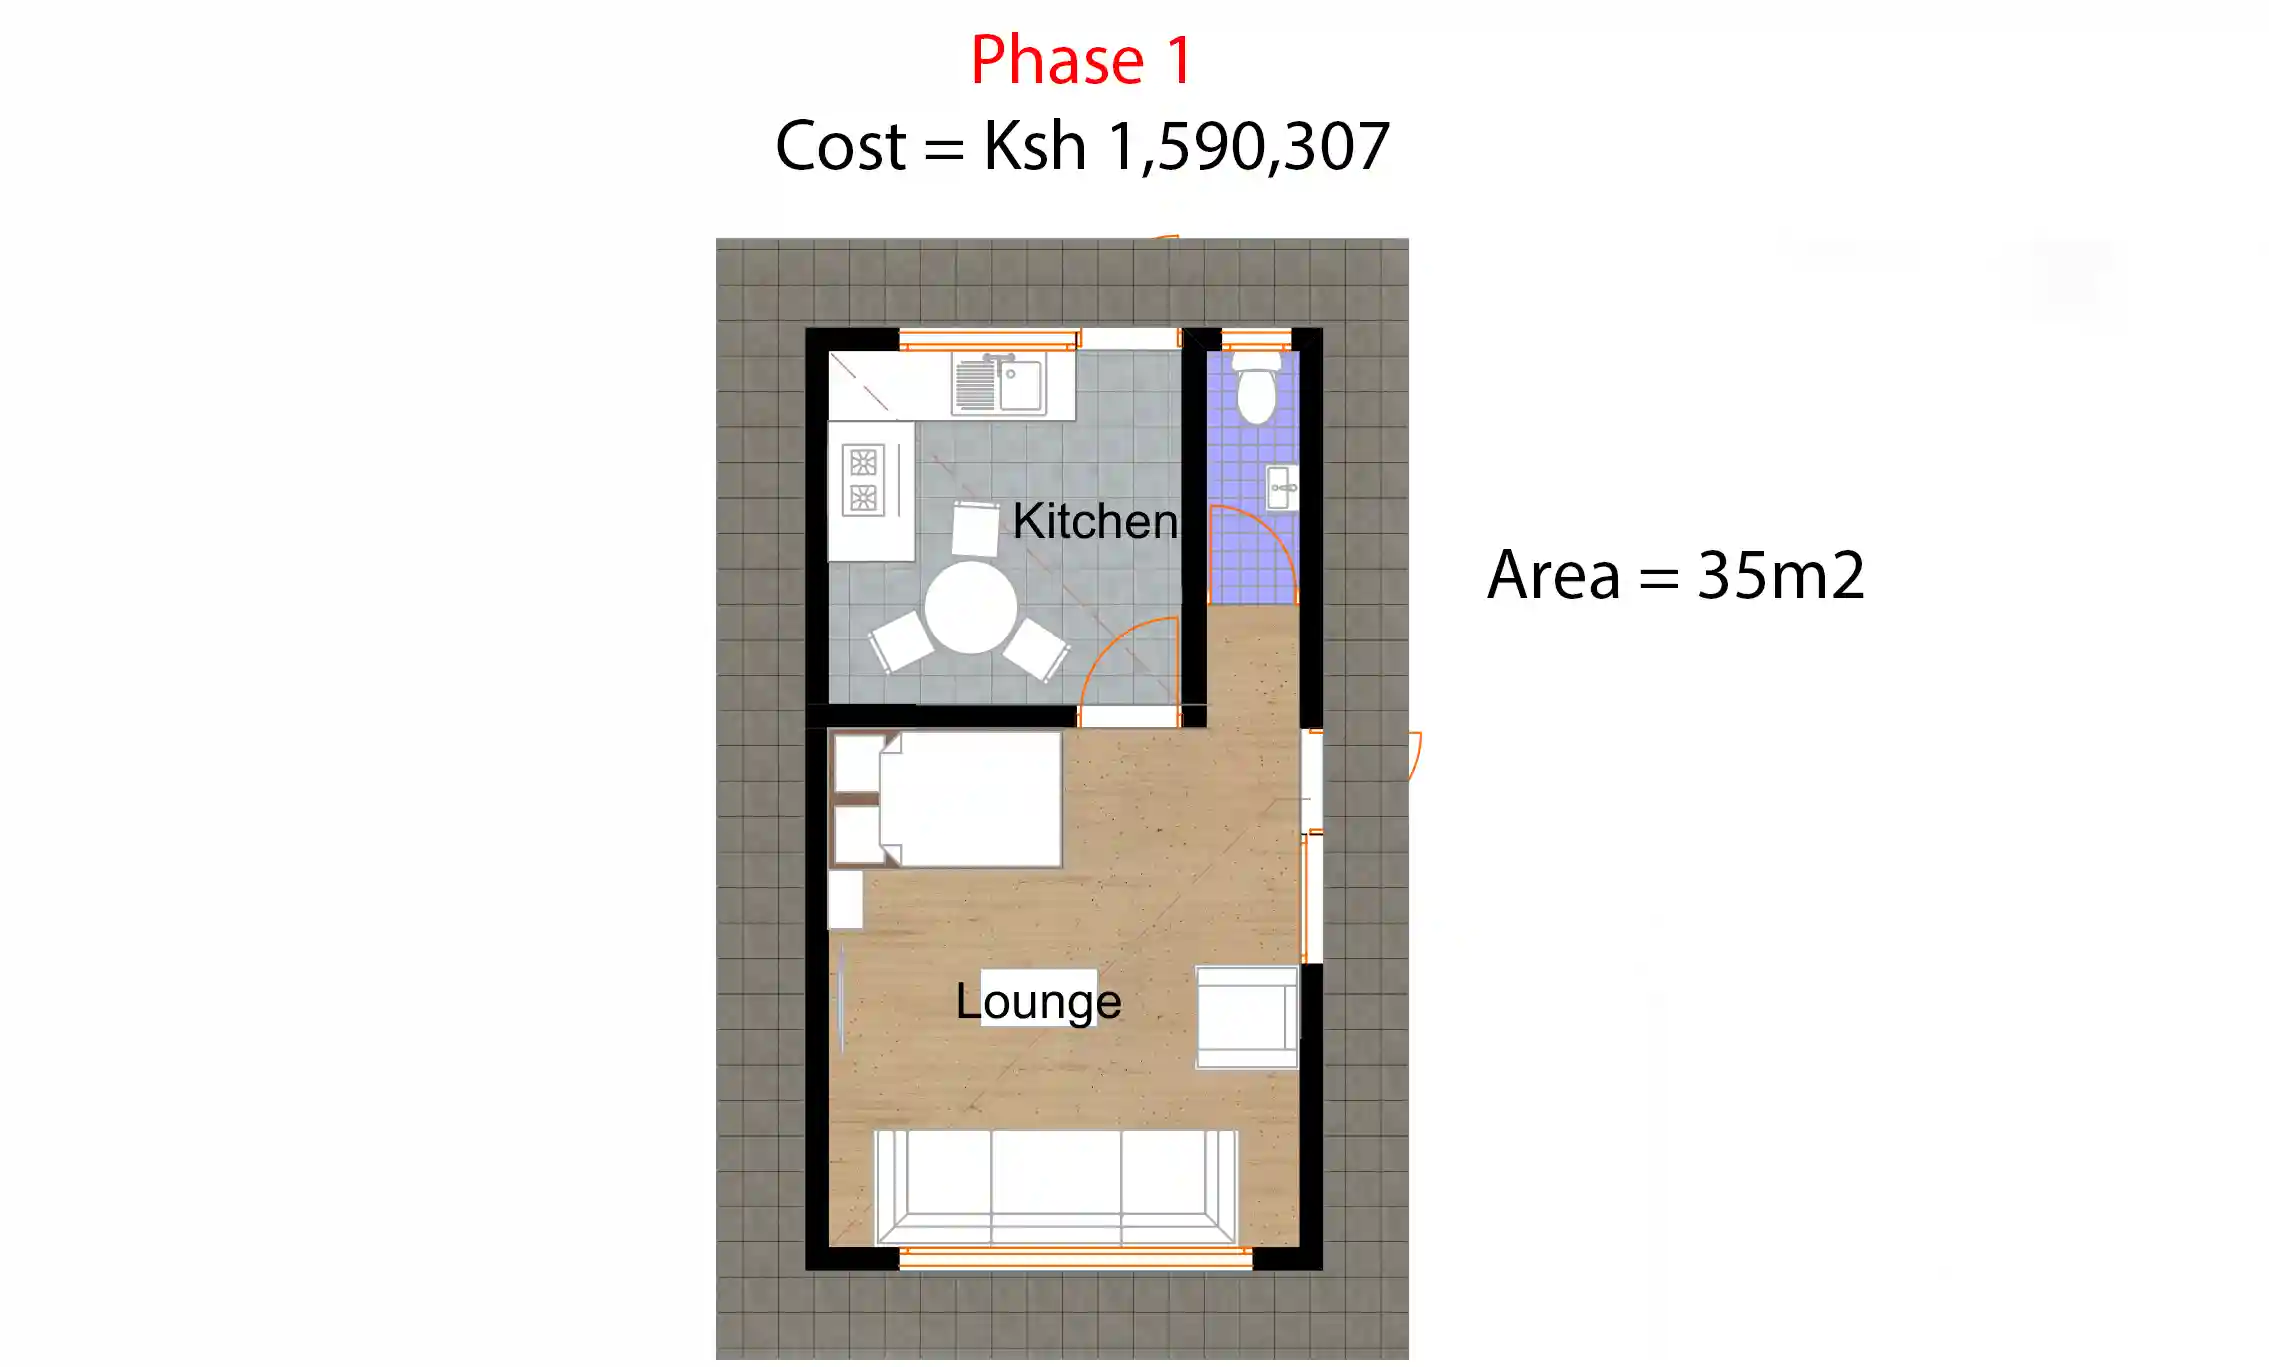 3 Bedroom Bungalow - ID 31101 - phase1plan.png from Inuua Tujenge house plans with 3 bedrooms and 2 bathrooms. ( jengapolepole )